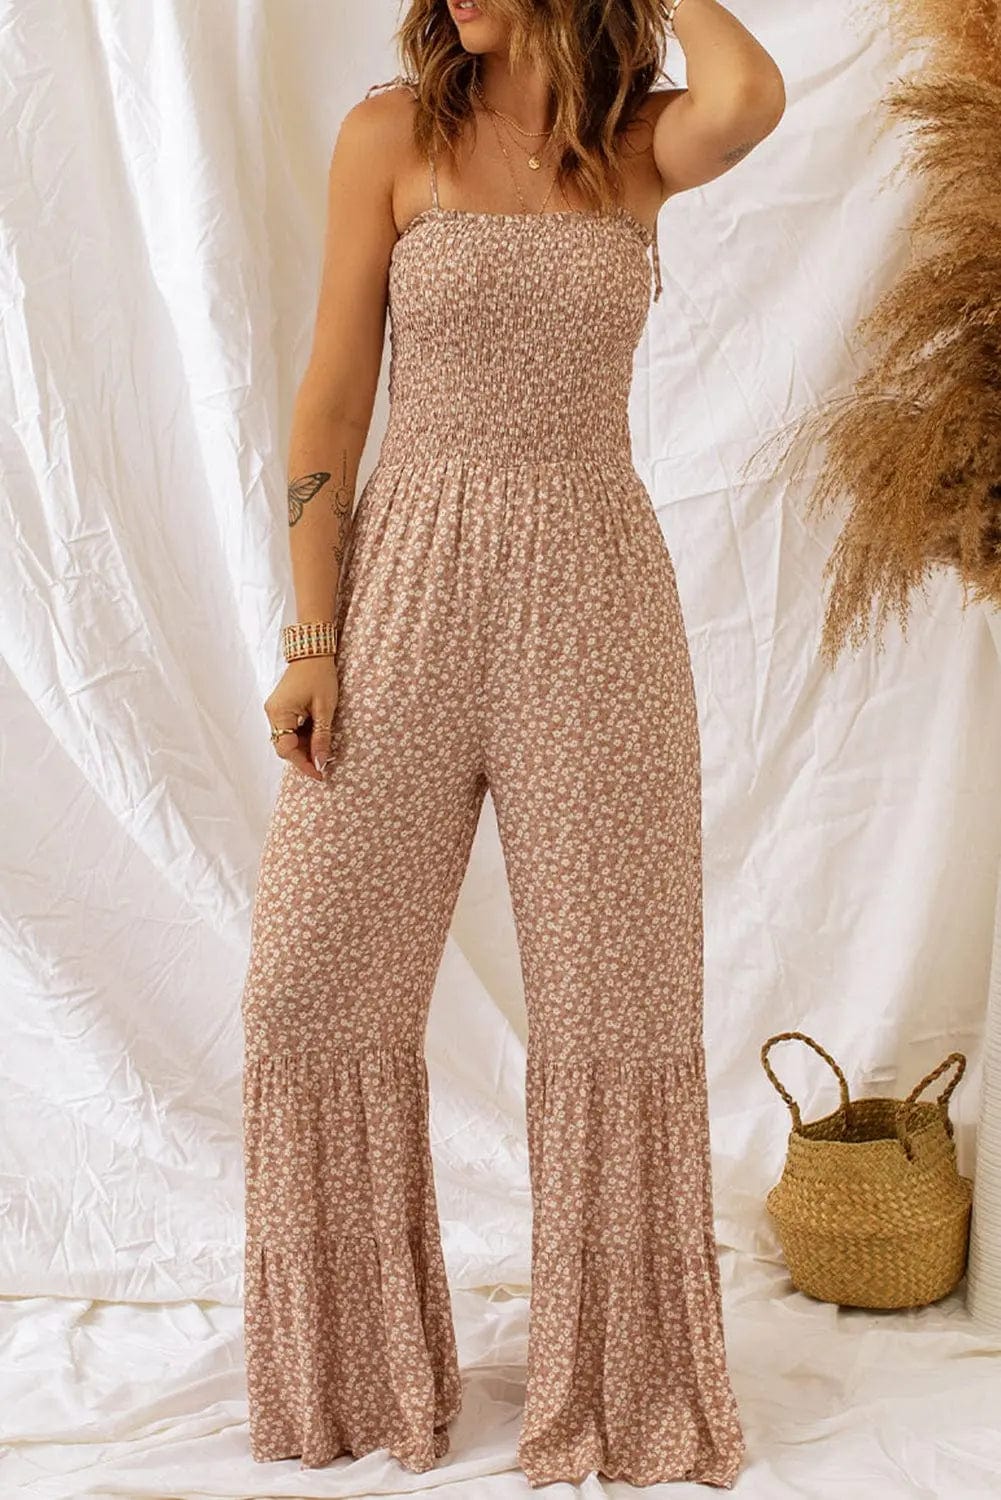 Floral Spaghetti Strap Smocked Wide Leg Jumpsuit  39.00 MPGD Corp Merchandise